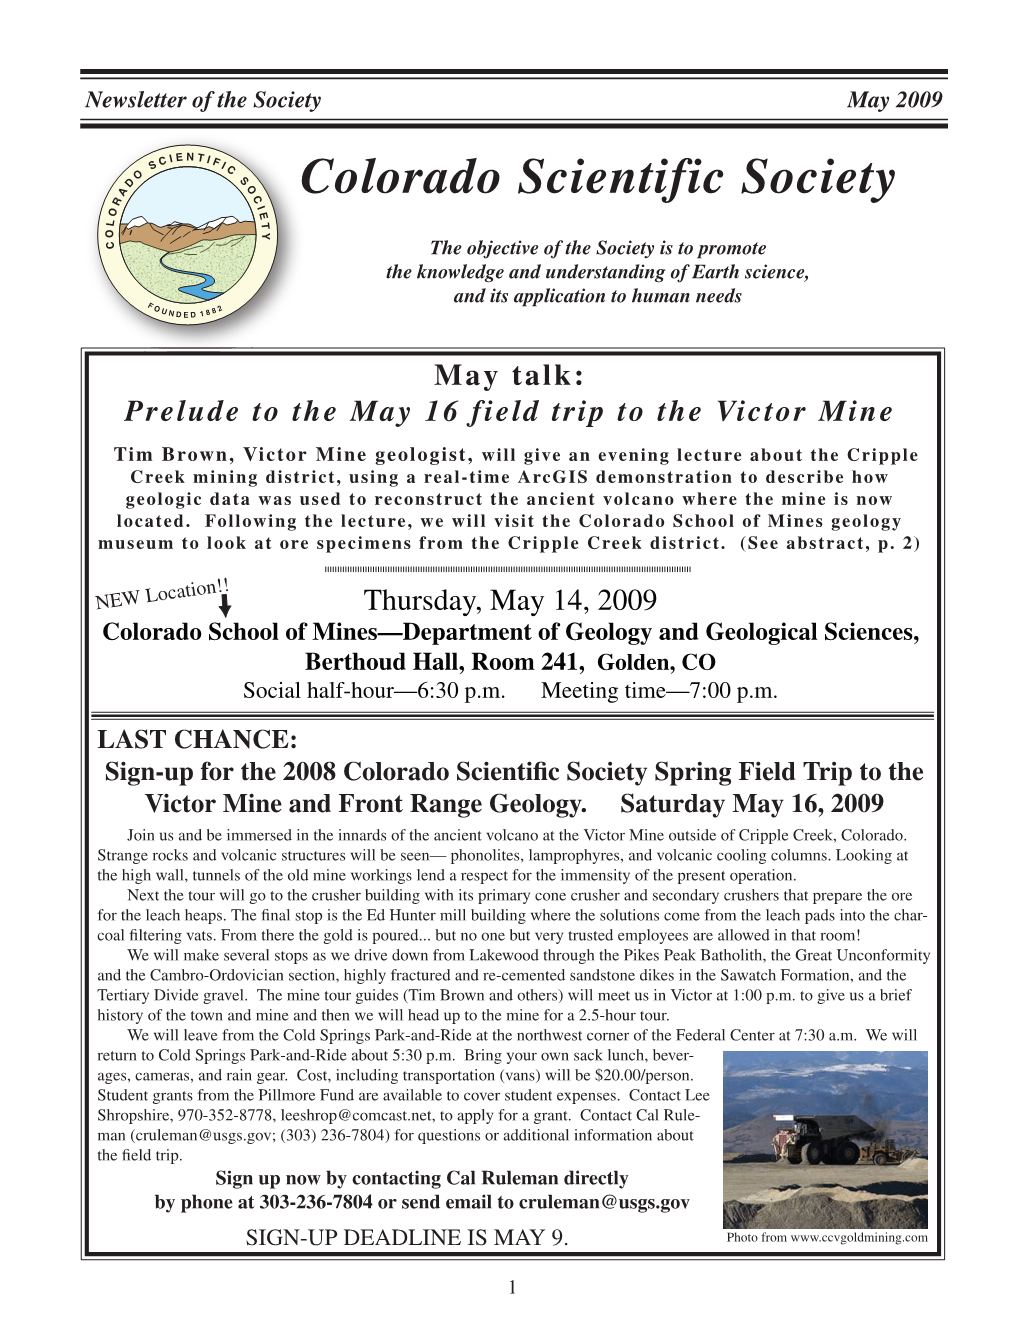 LAST CHANCE: Sign-Up for the 2008 Colorado Scientific Society Spring Field Trip to the Victor Mine and Front Range Geology